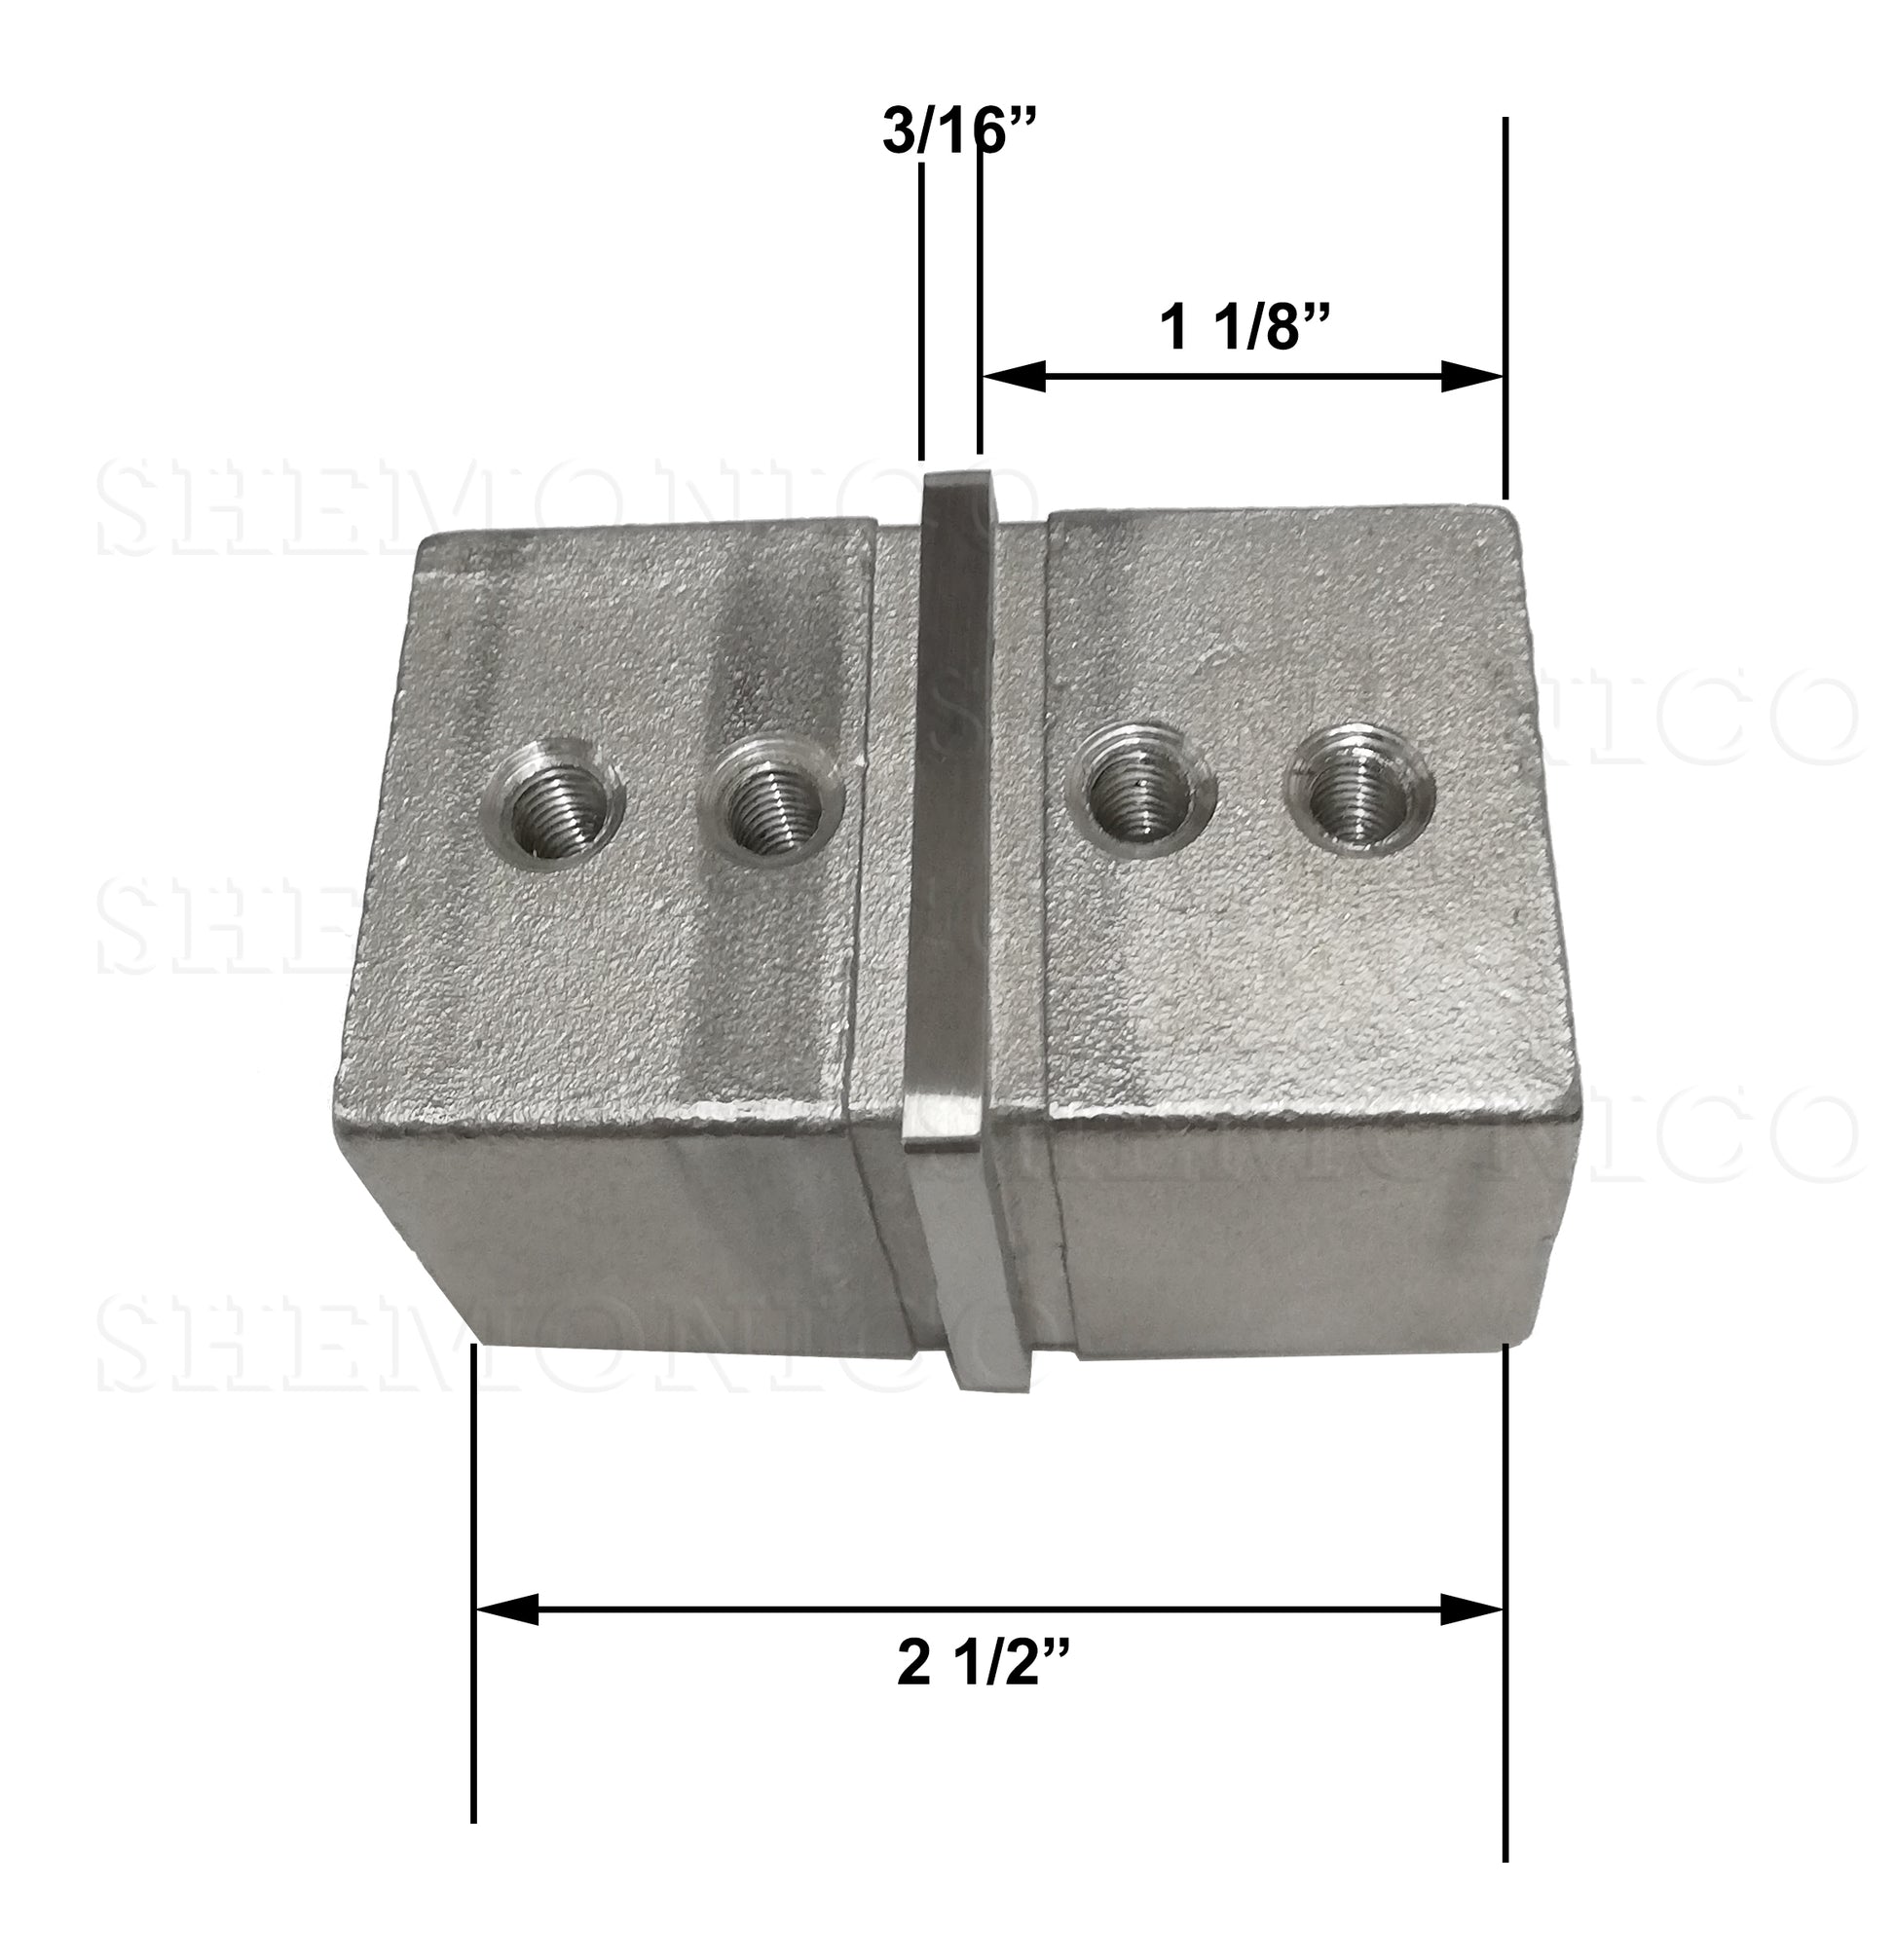 Square Connector for 1-1/2" Square Cap Railing Slot Tube Stainless Steel T316 (G1120-150-150) - SHEMONICO